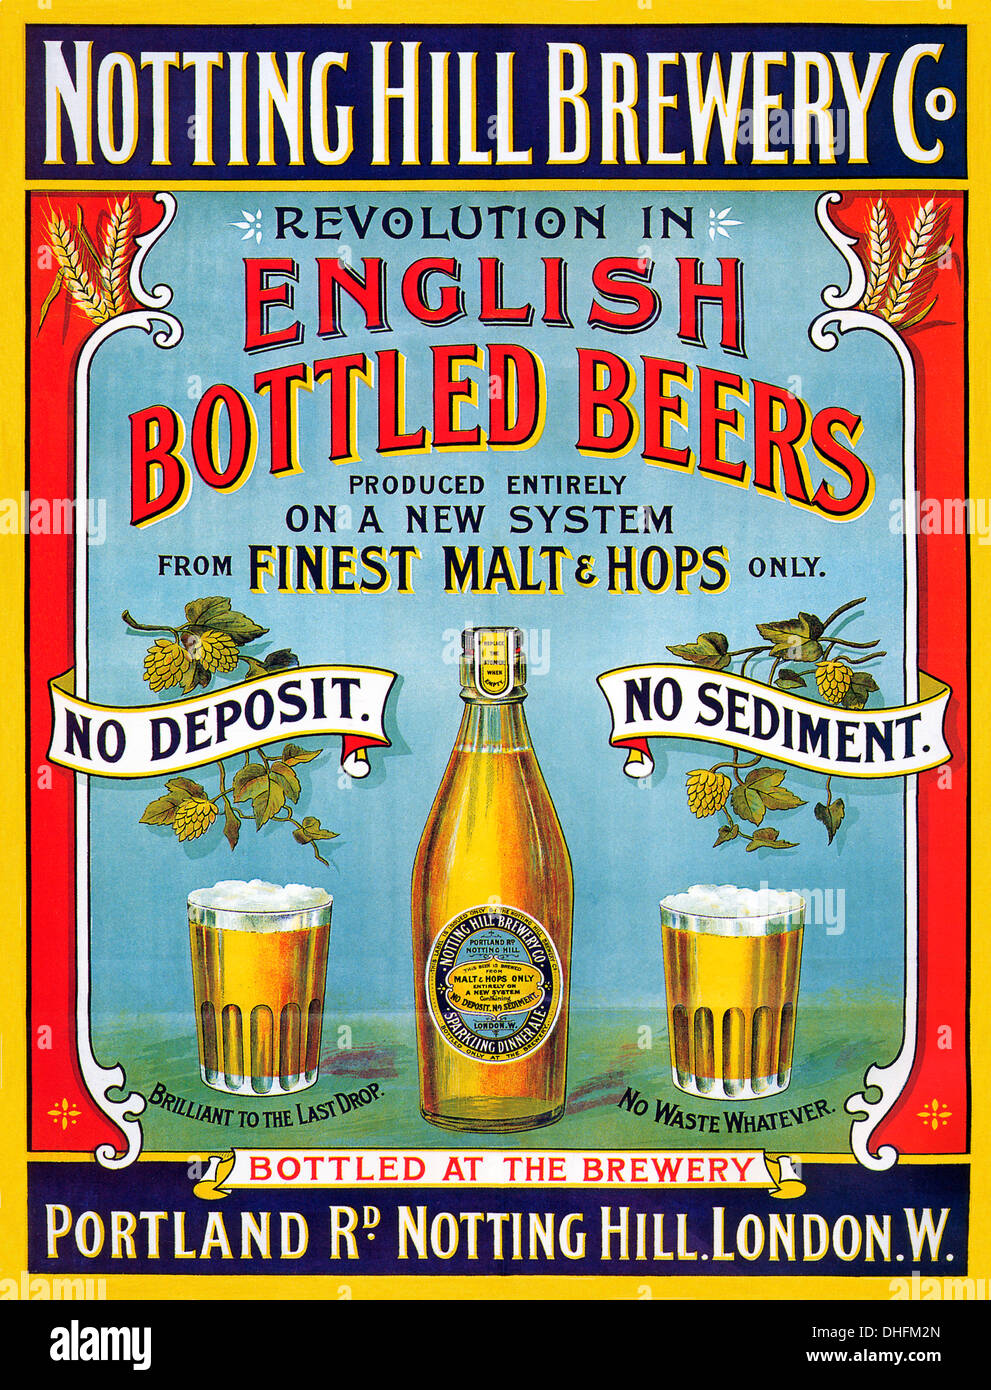 Notting Hill Brewery Co, 1899 poster for the London brewery whose bottled beers threw no deposit or sediment Stock Photo